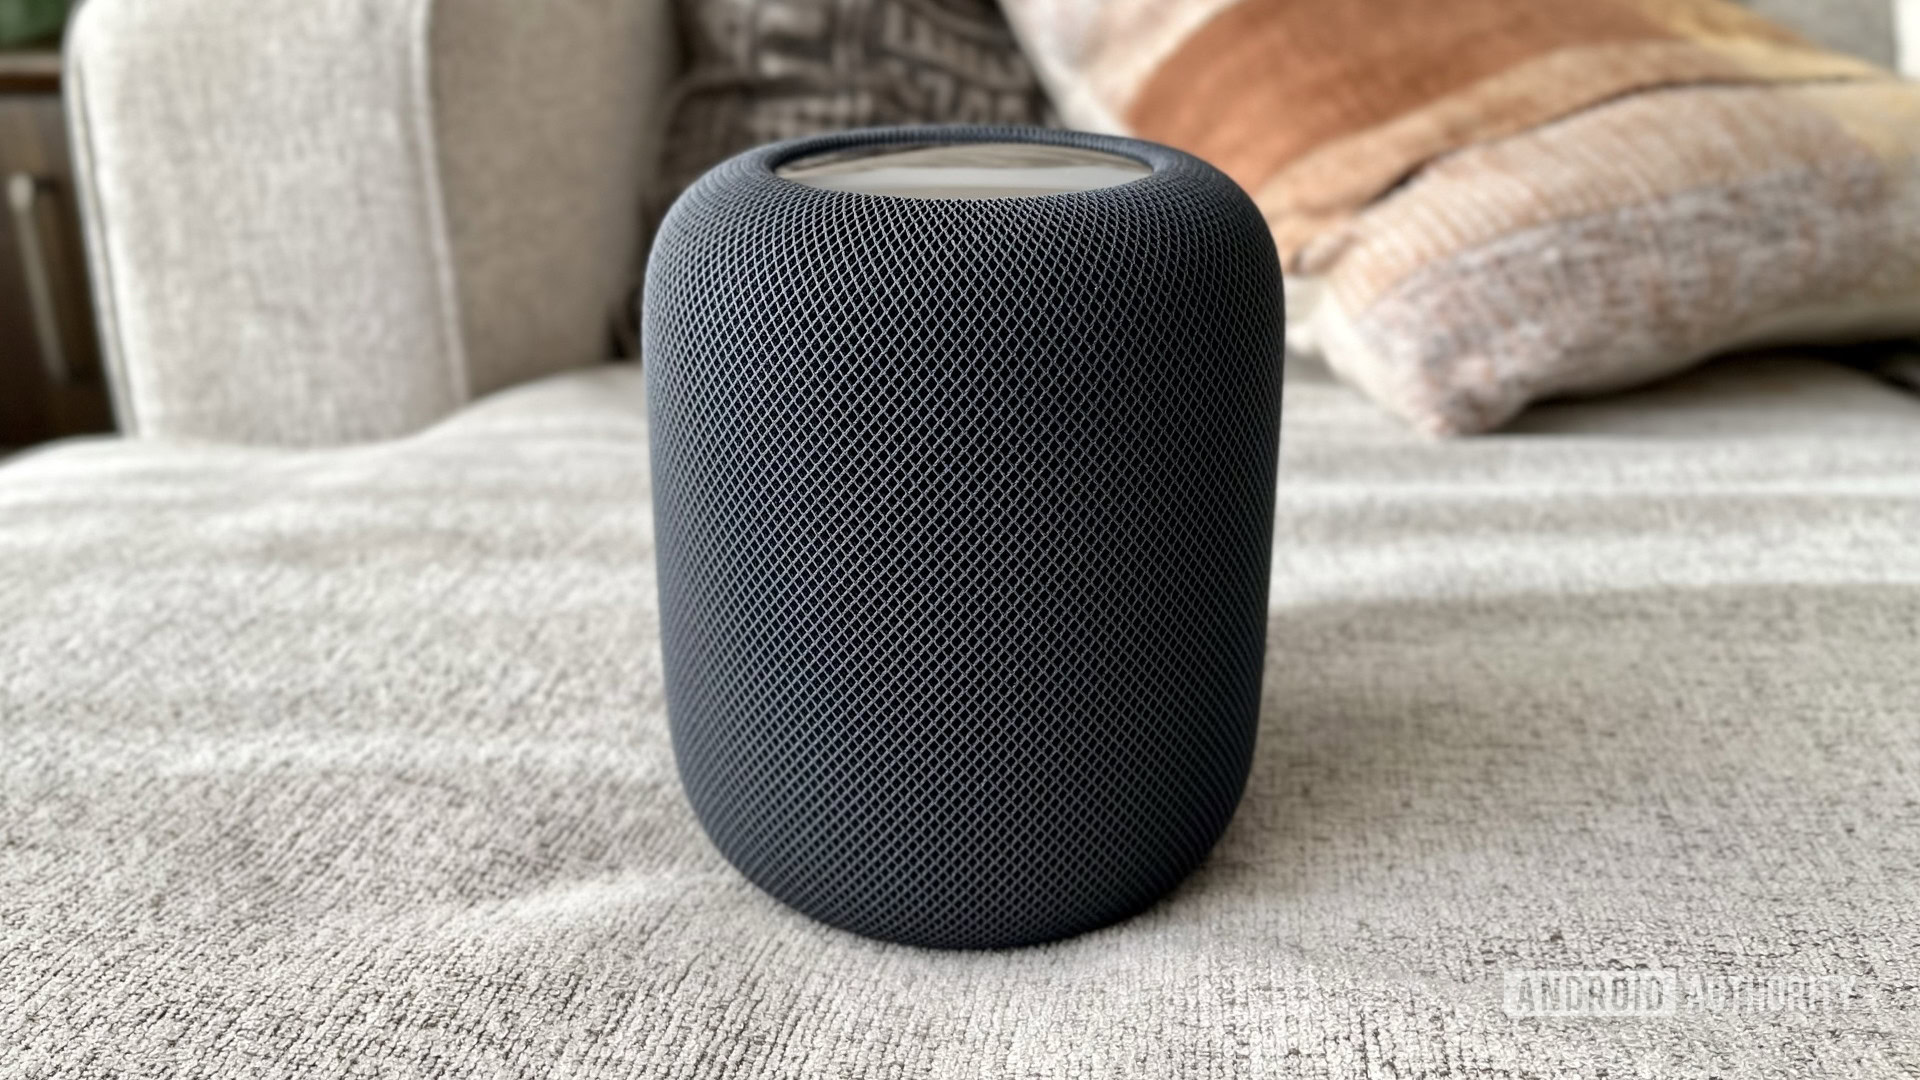 This 42% discount on the Apple HomePod 2 blows other deals away